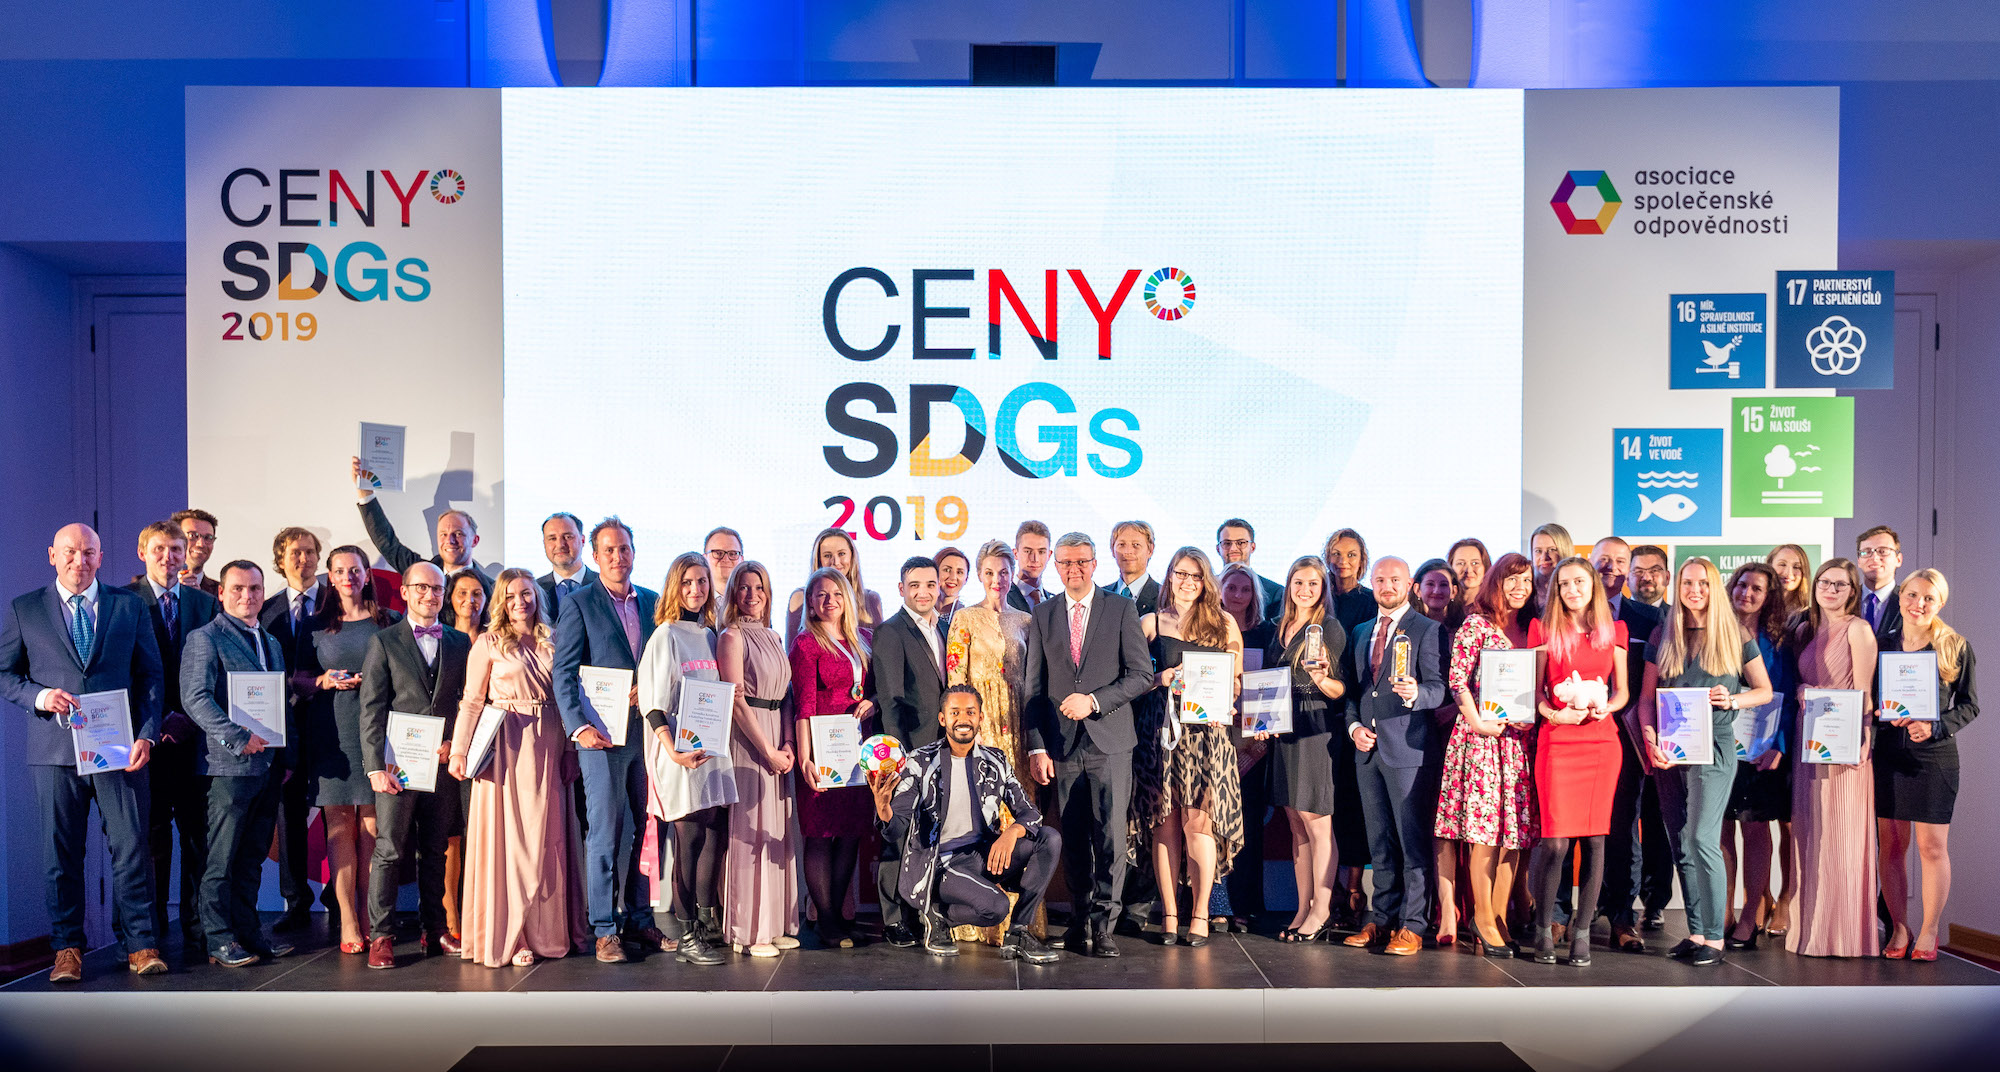 GINA Software became absolute winner of the SDGs 2019 awards